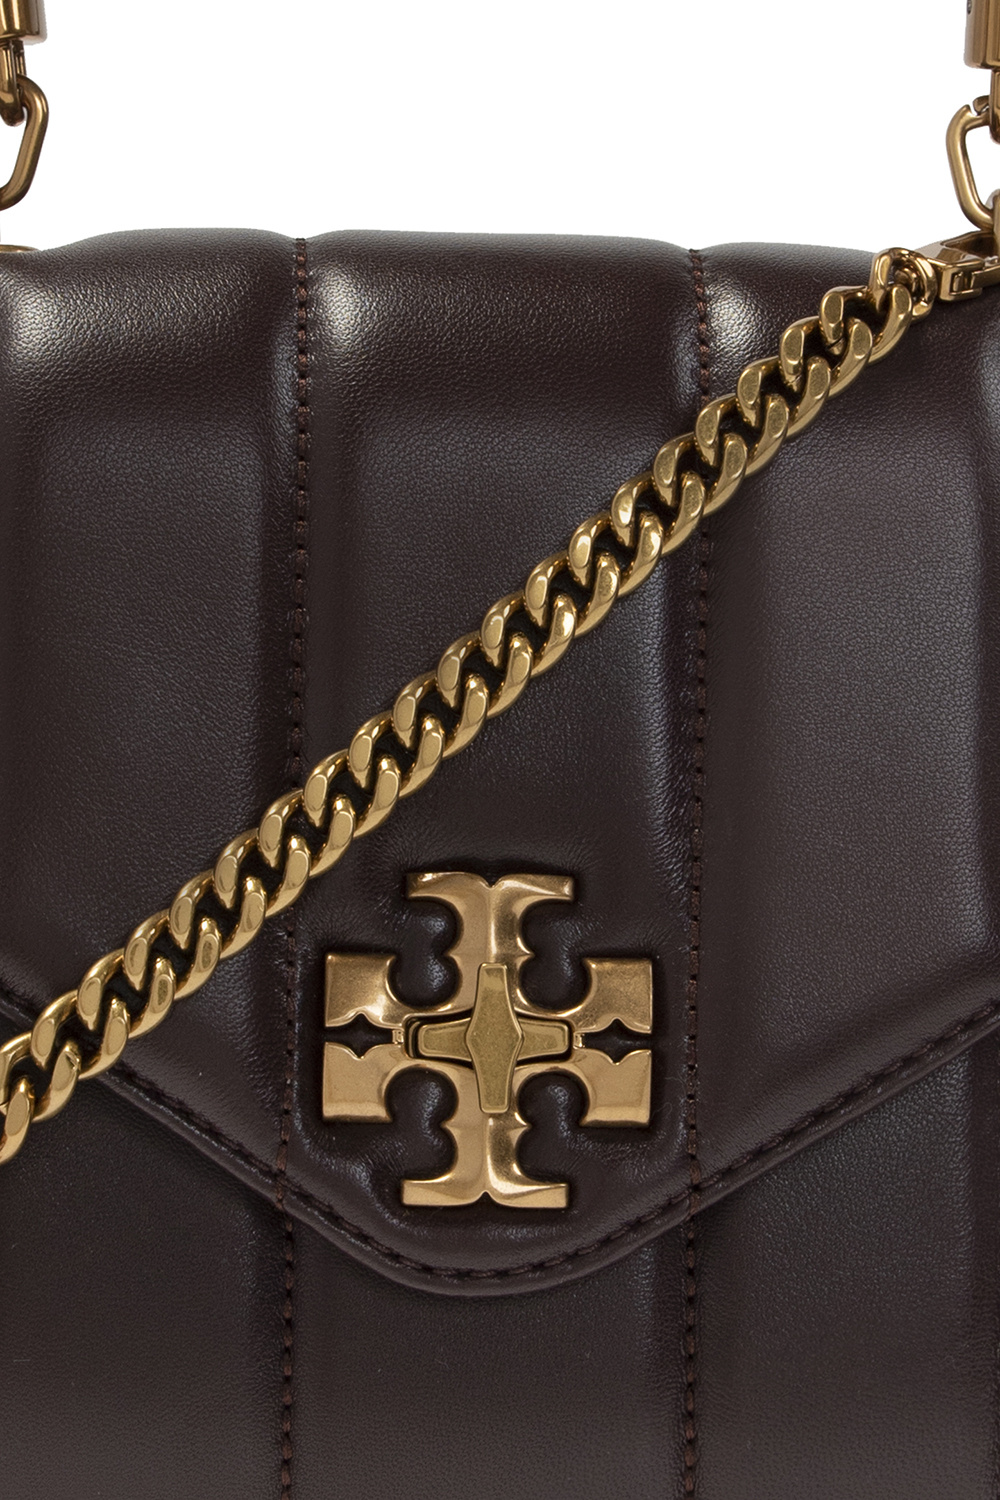 Tory Burch's Small Kira Bag Is A Perfect Gift